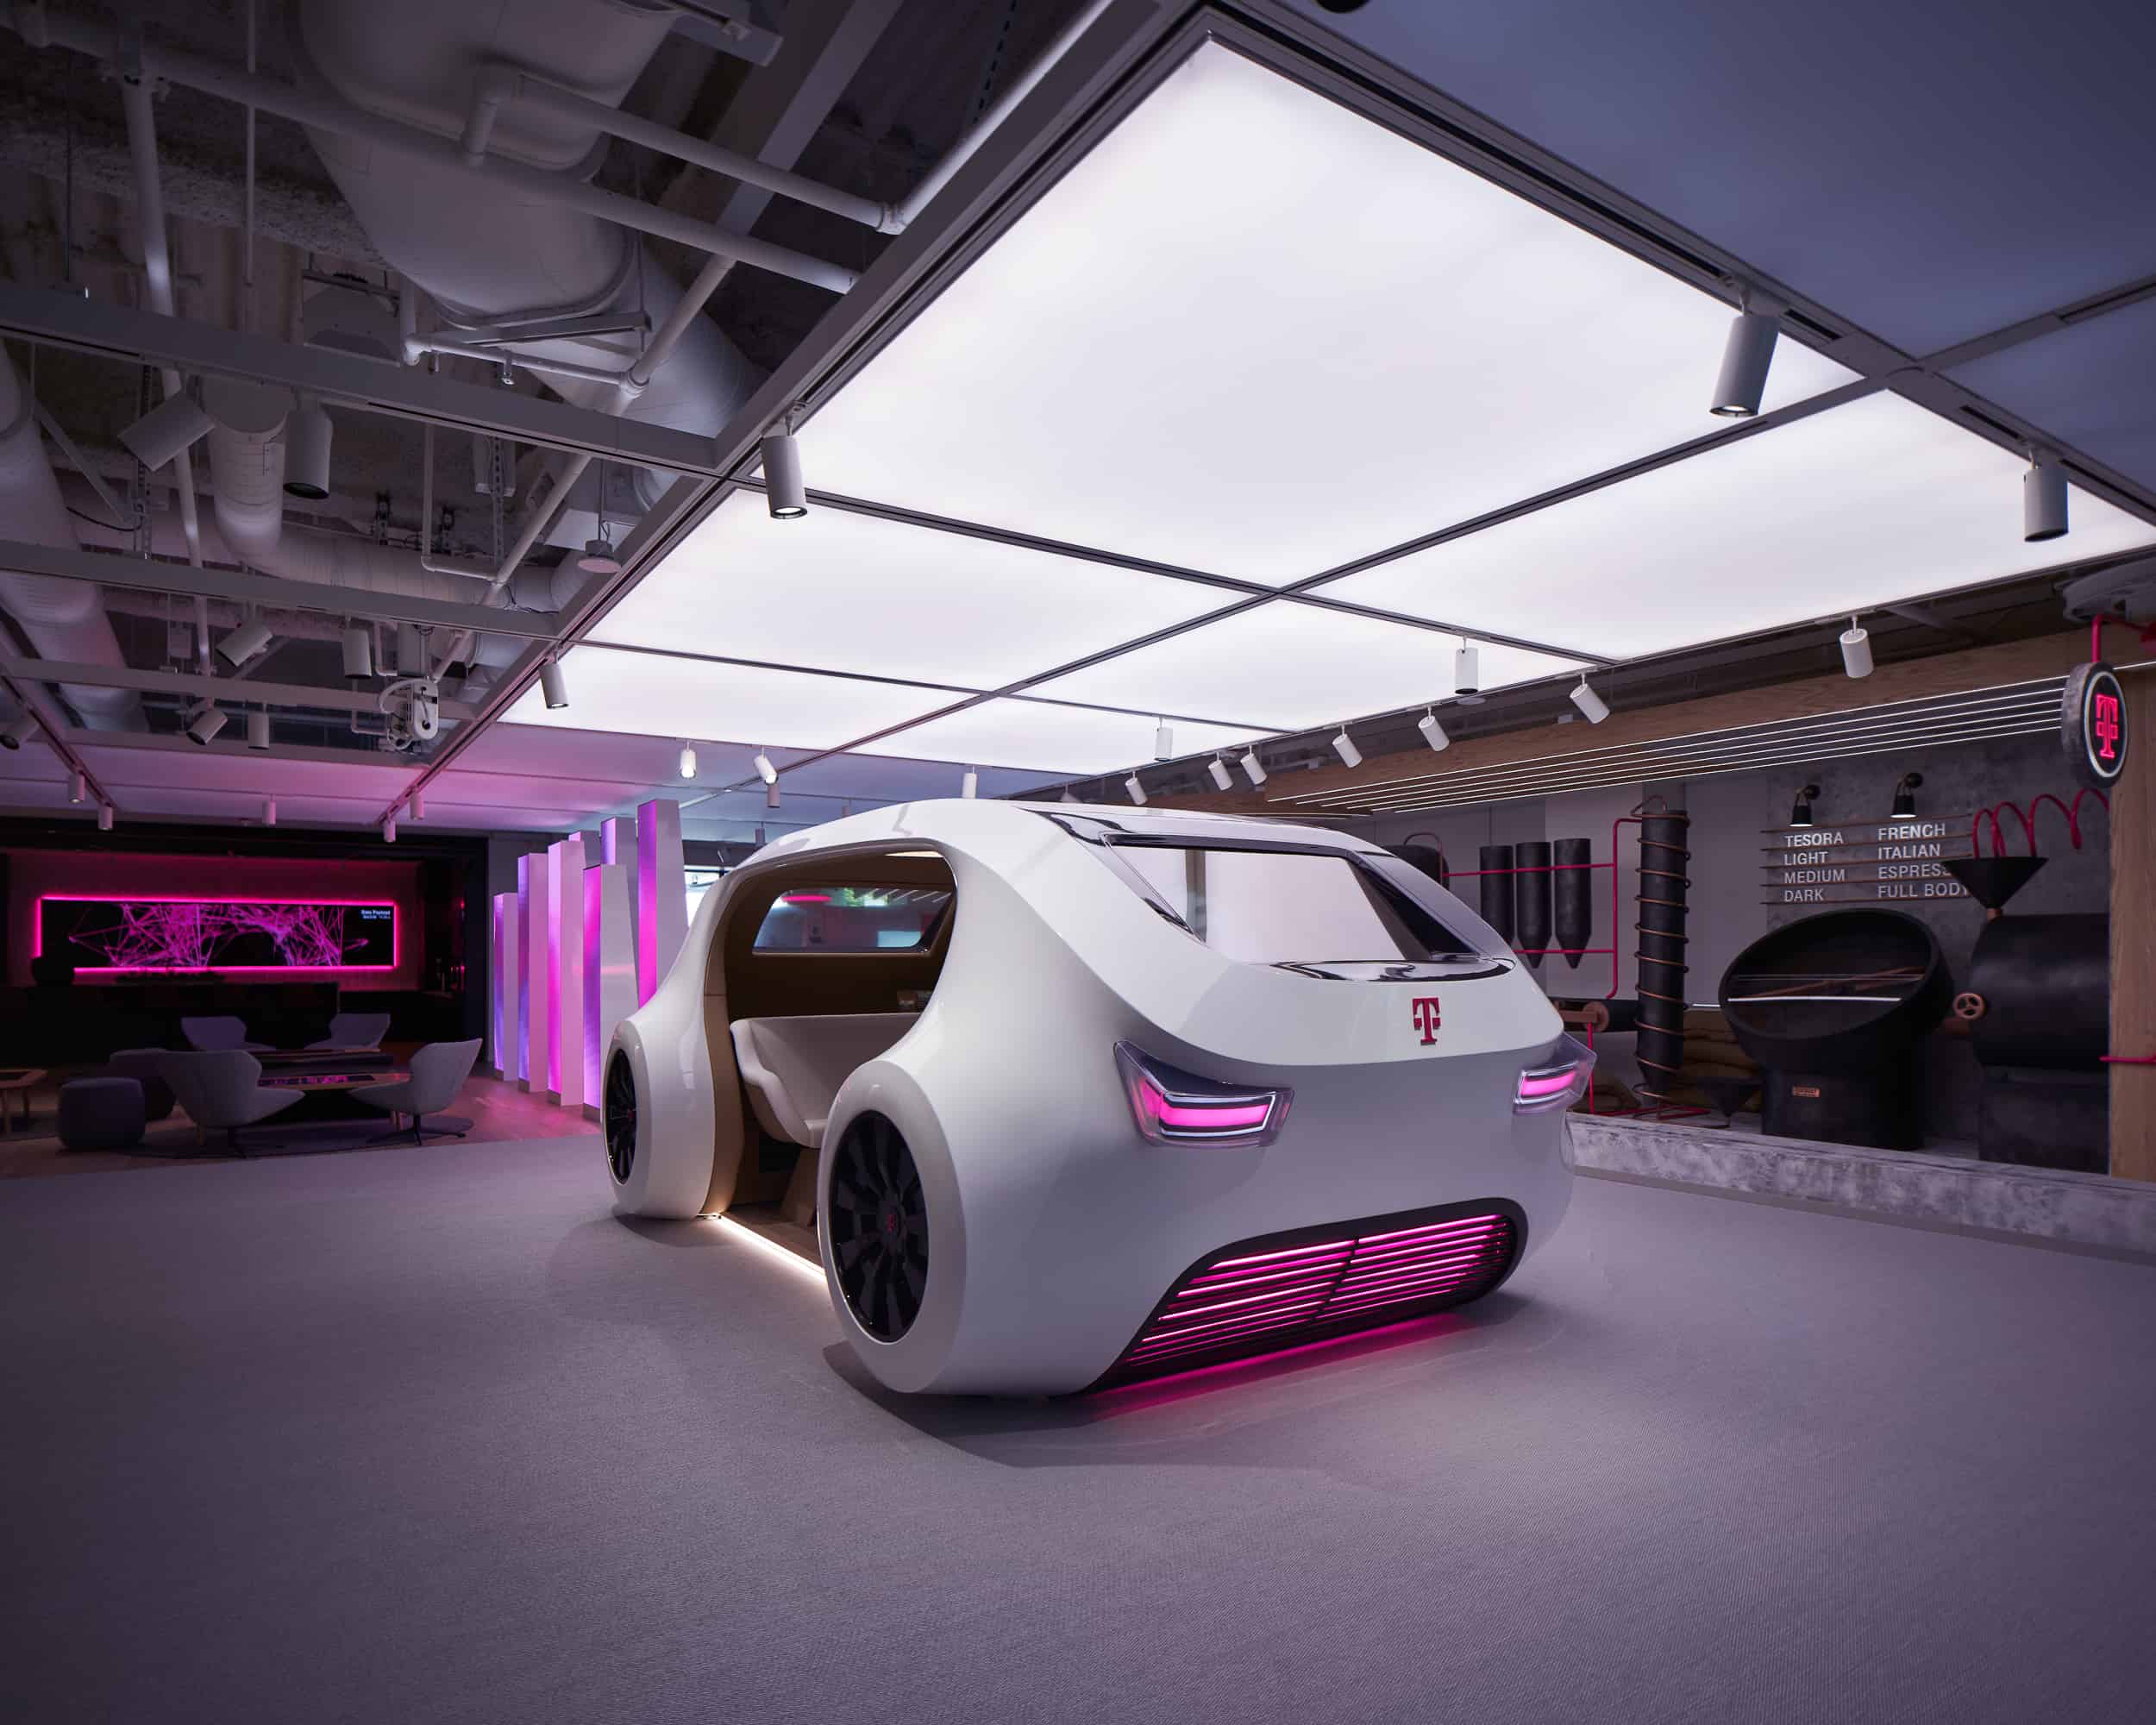 T mobile car in experience center with audio visual tech